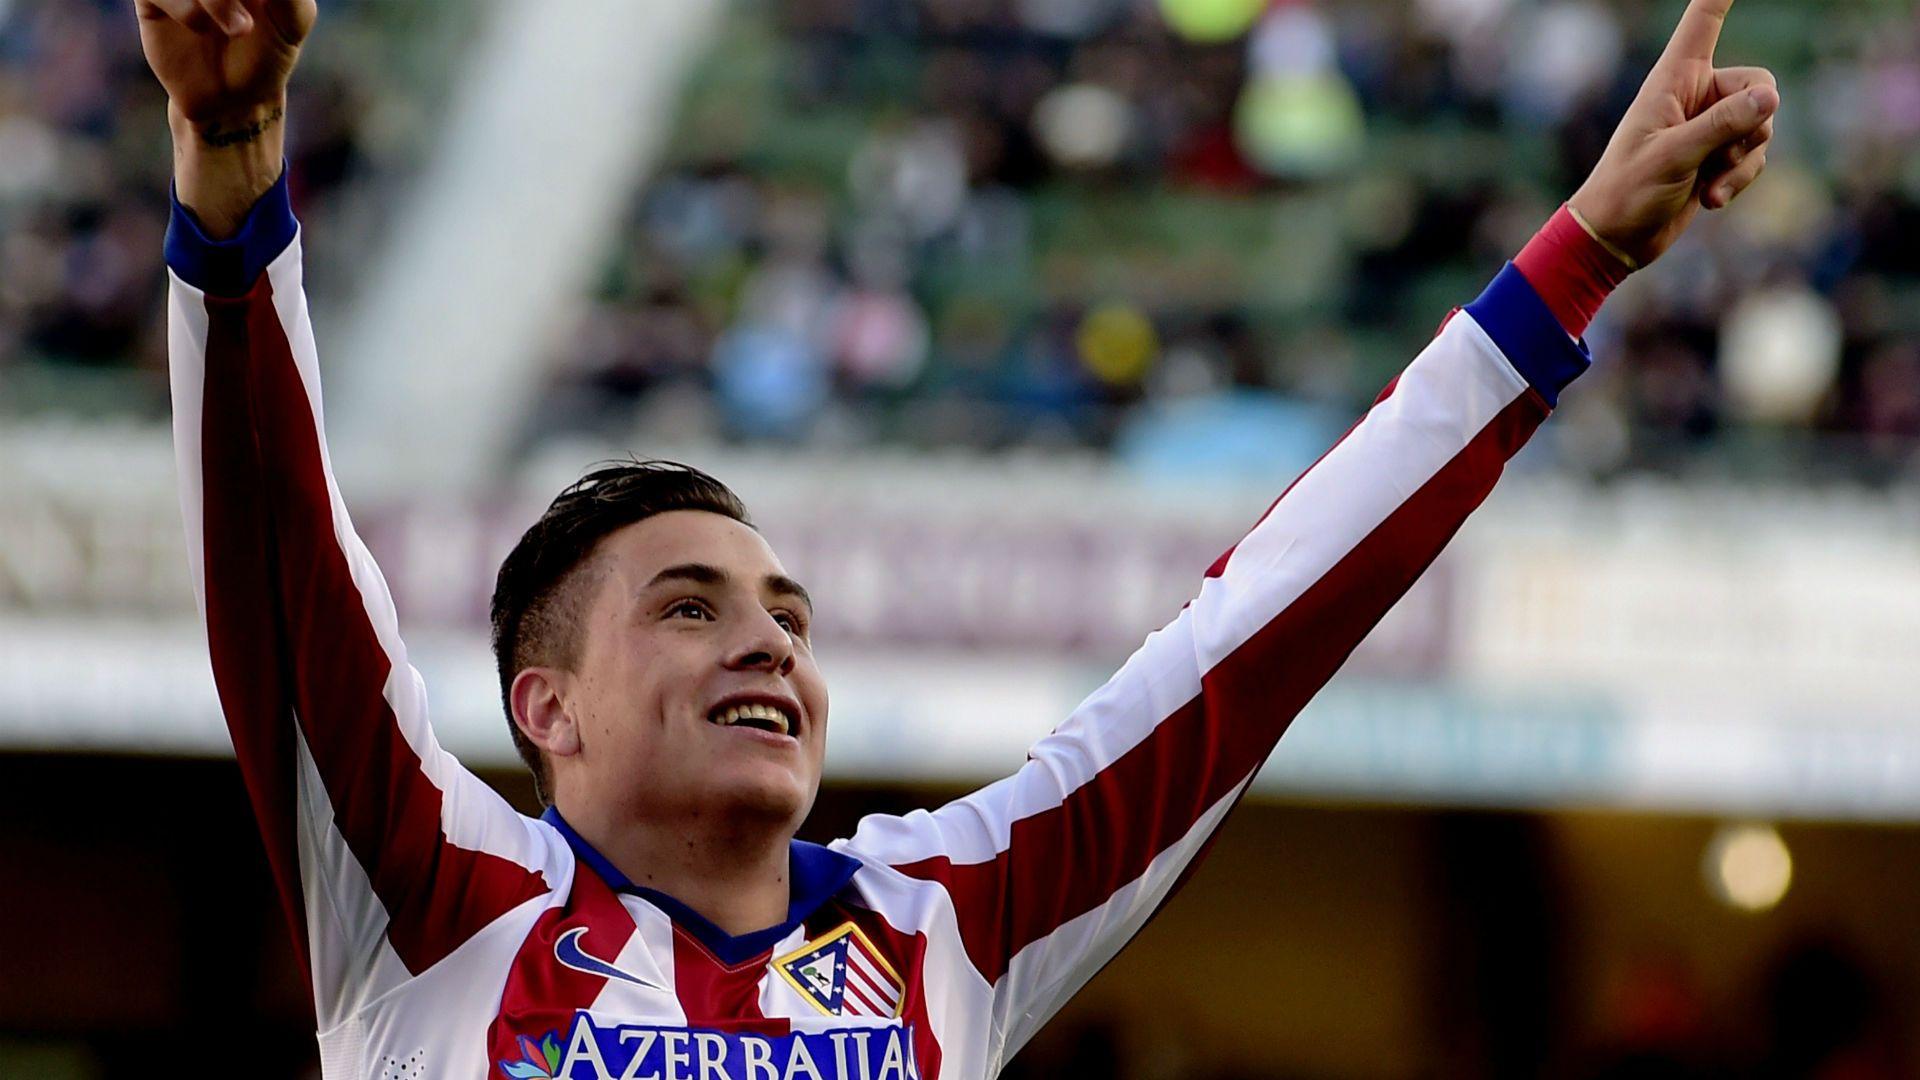 Jose Gimenez: Why The Atletico Starlet Would Be A Fine Signing